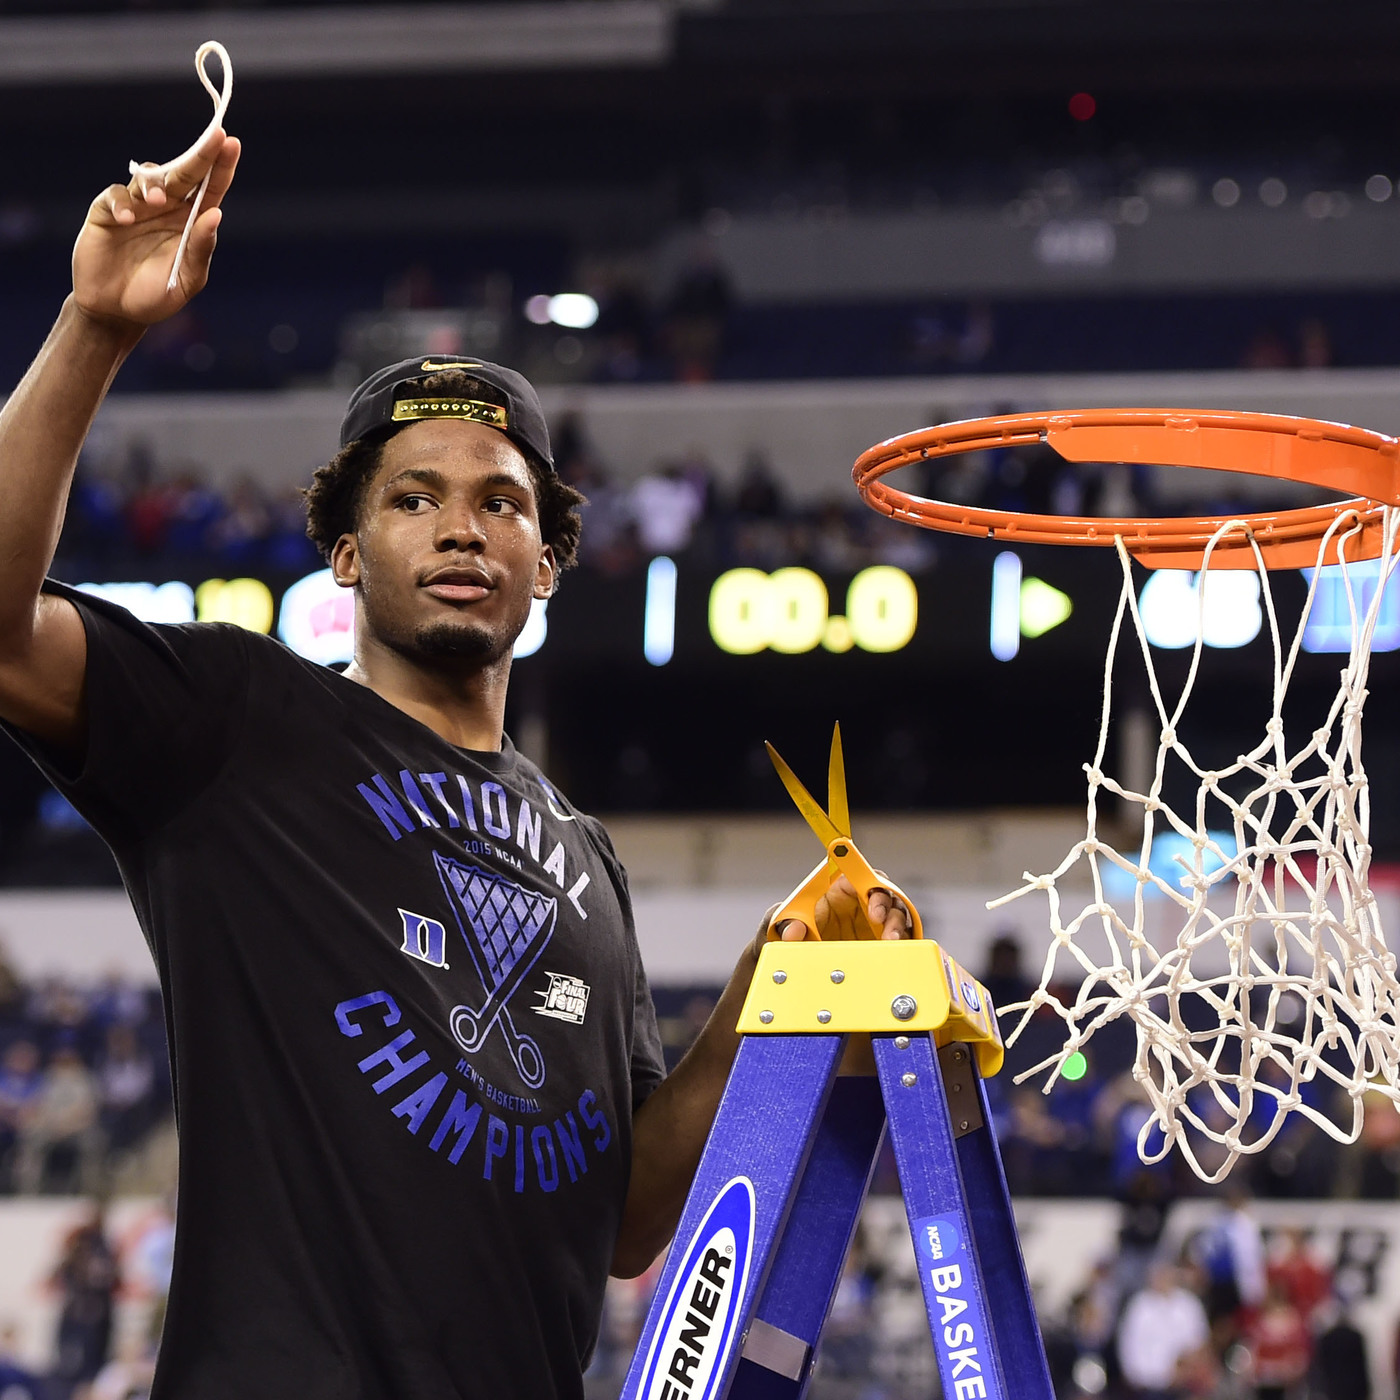 Draft talk, Justise Winslow interview